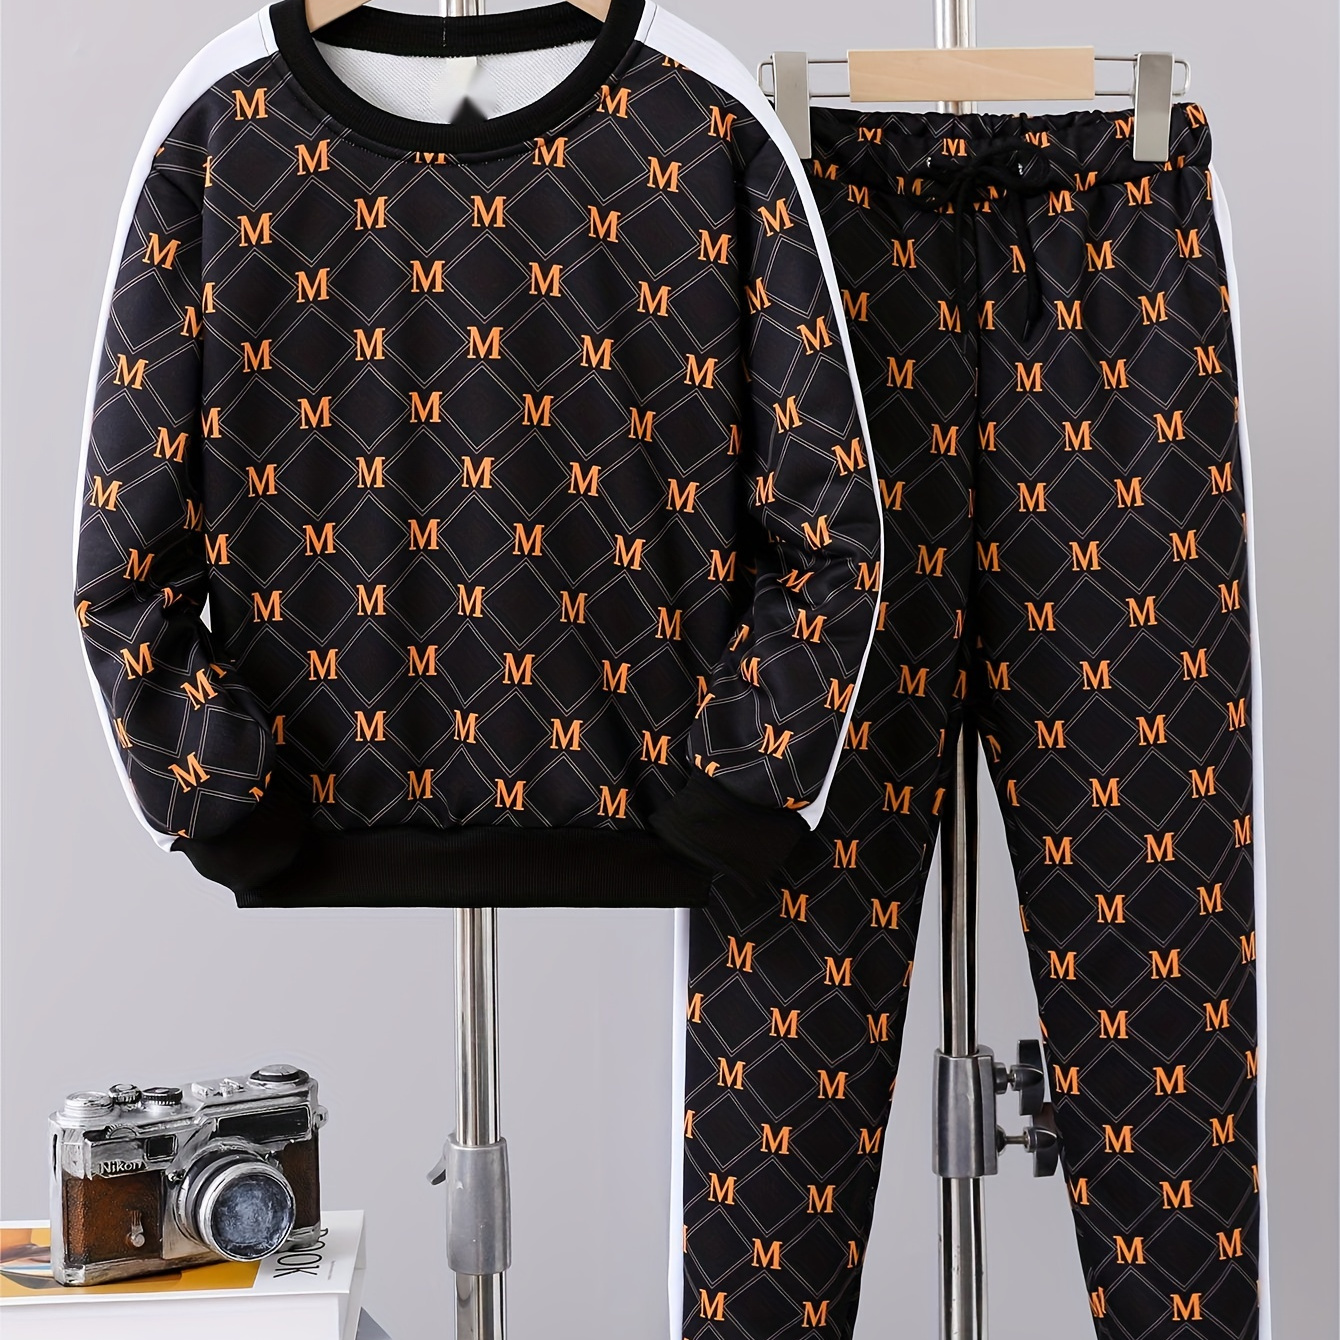 

2pcs Boy's Letter M Allover Print Outfit, Sweatshirt & Sweatpants Set, Casual Long Sleeve Top, Boy's Clothes For Spring Fall Winter, As Gift